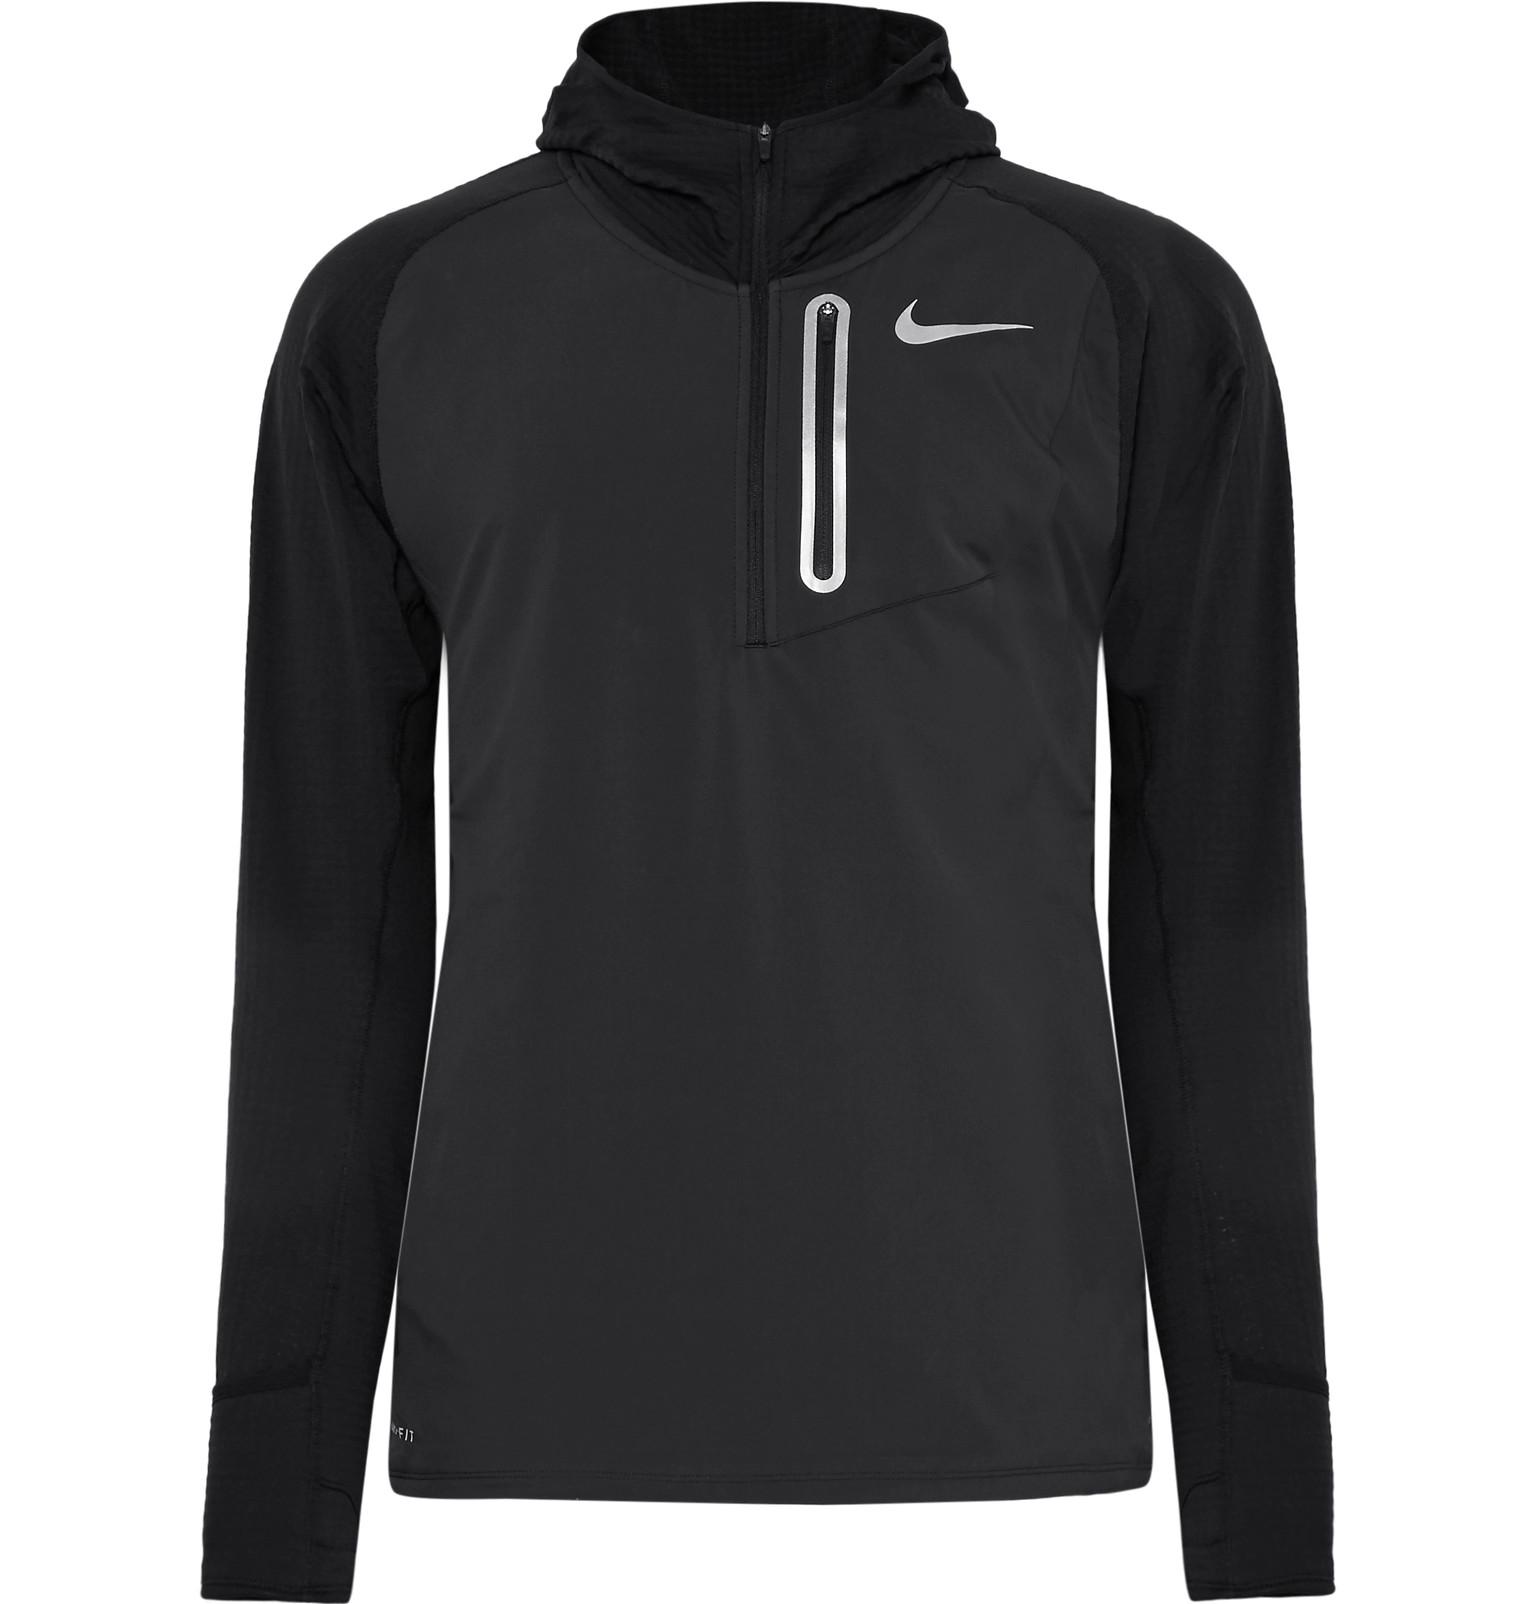 Nike Therma Sphere Element Hybrid Factory Sale, SAVE 40% - mpgc.net